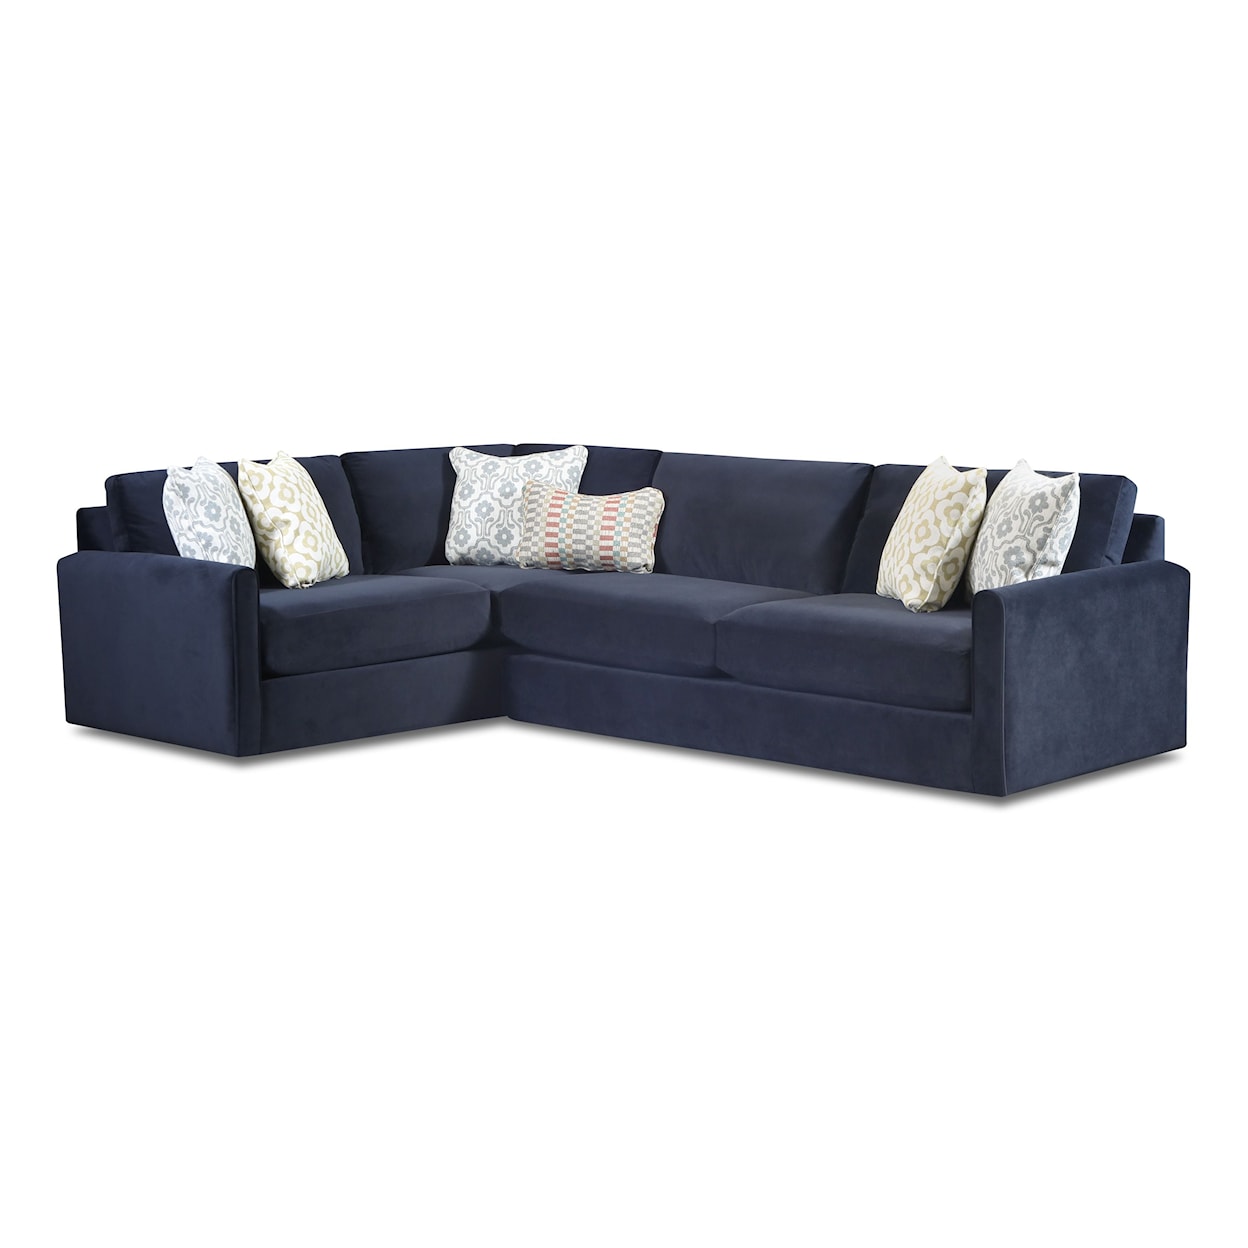 Fusion Furniture 7000 MARQUIS 2-Piece Sectional